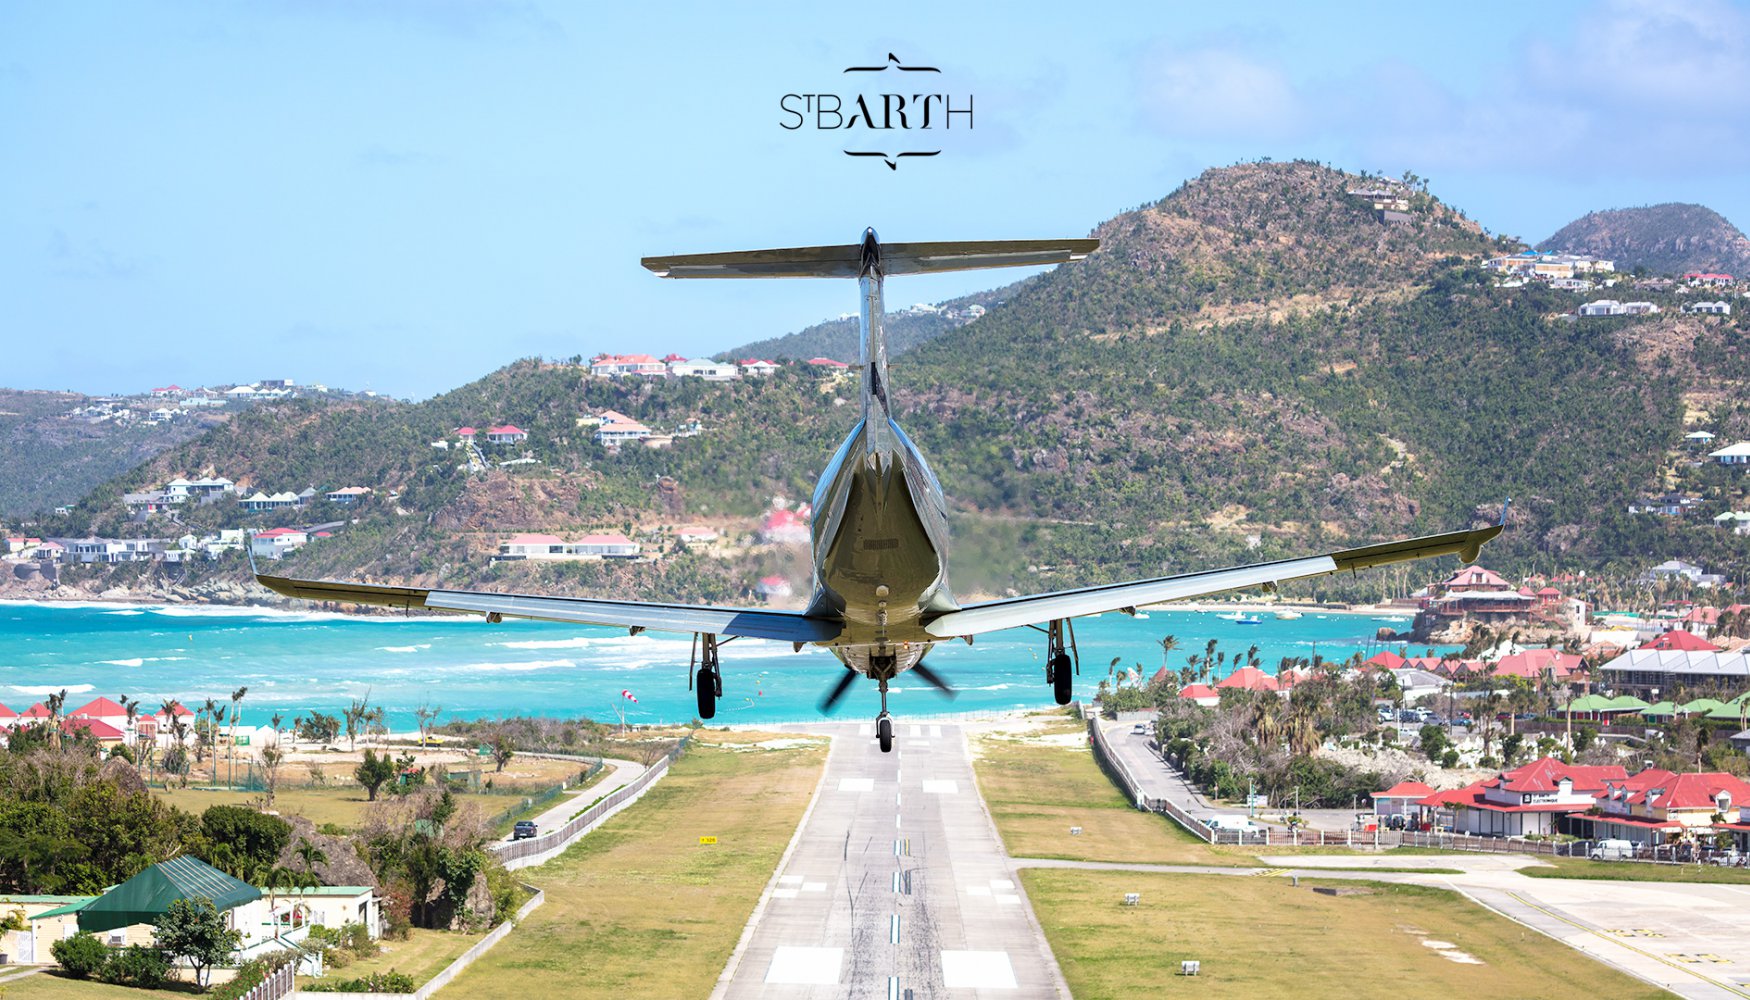 8 Quintessential Must-Do's In St. Barts - Jetset Times